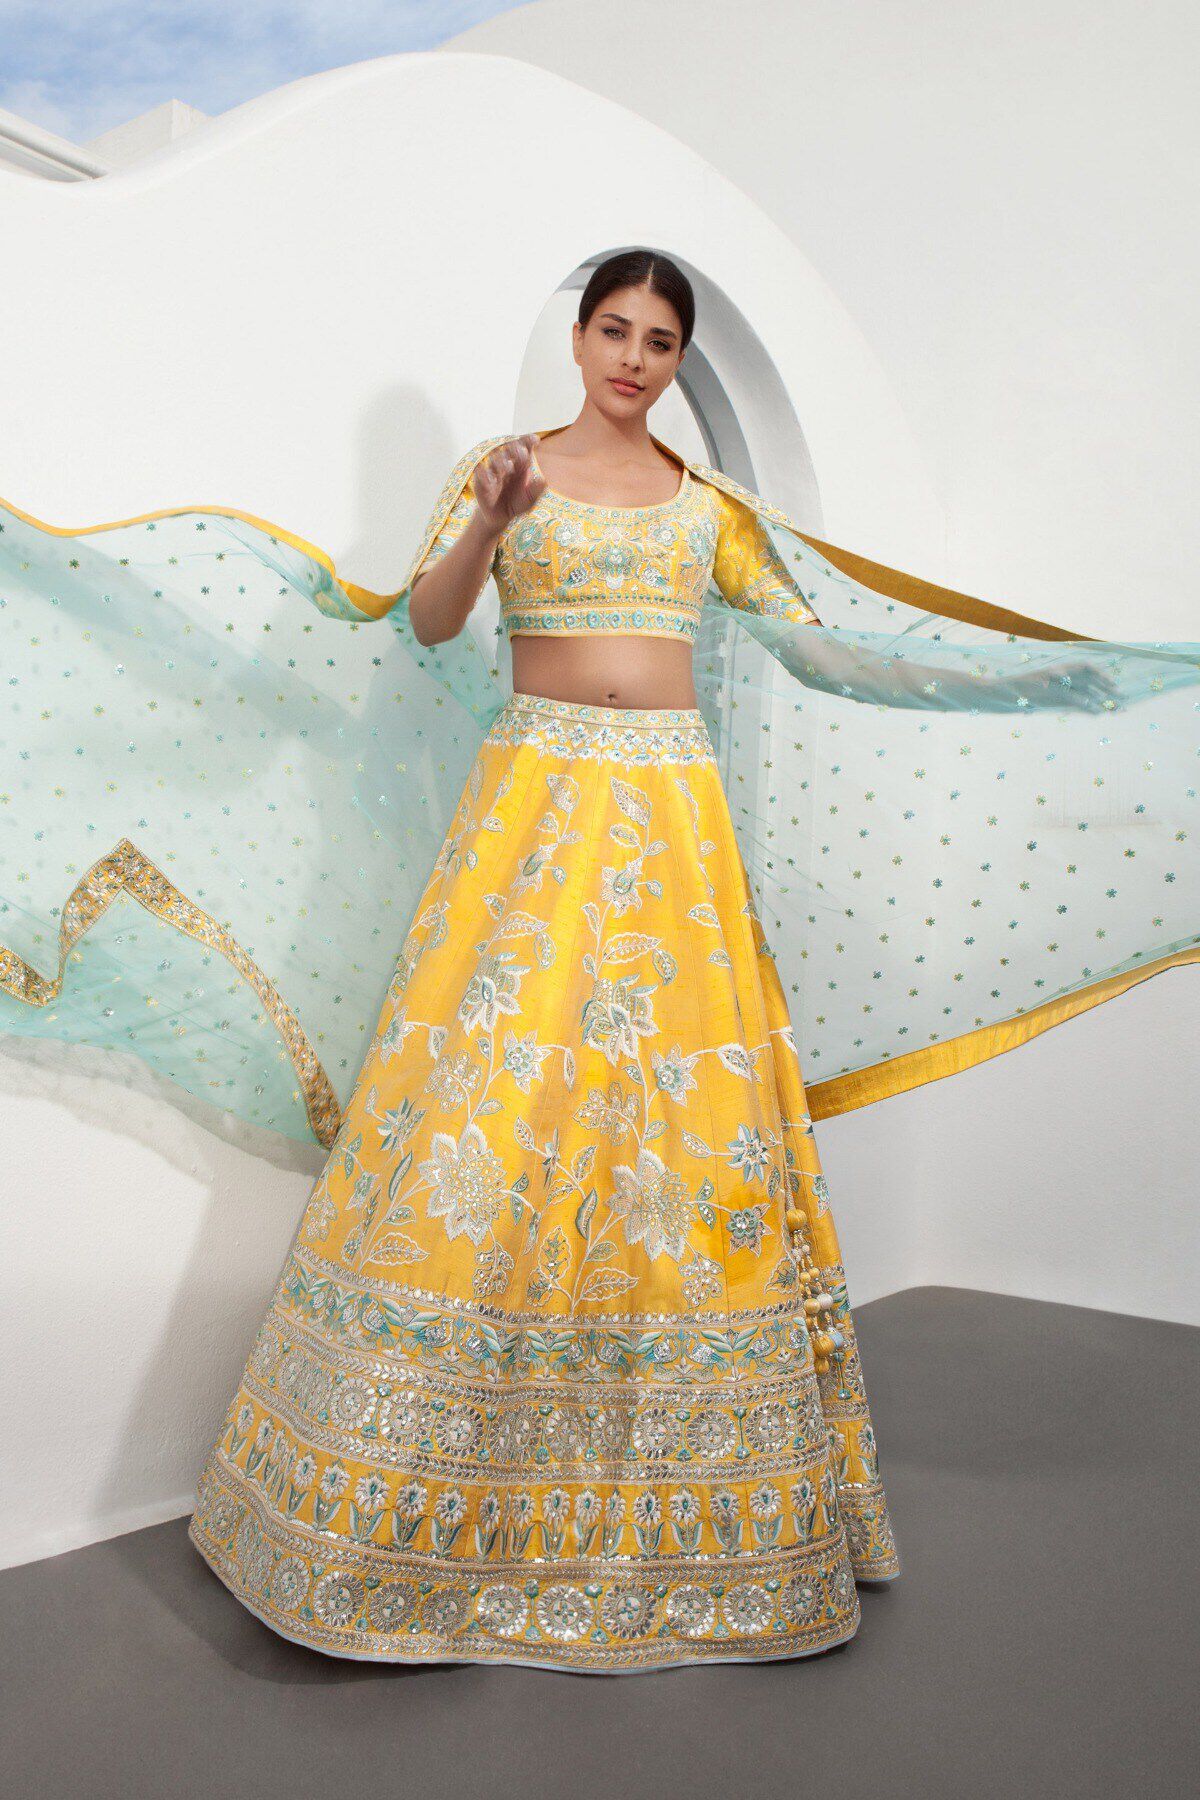 Trending Outfits That Are Perfect For Indian Weddings | Libas